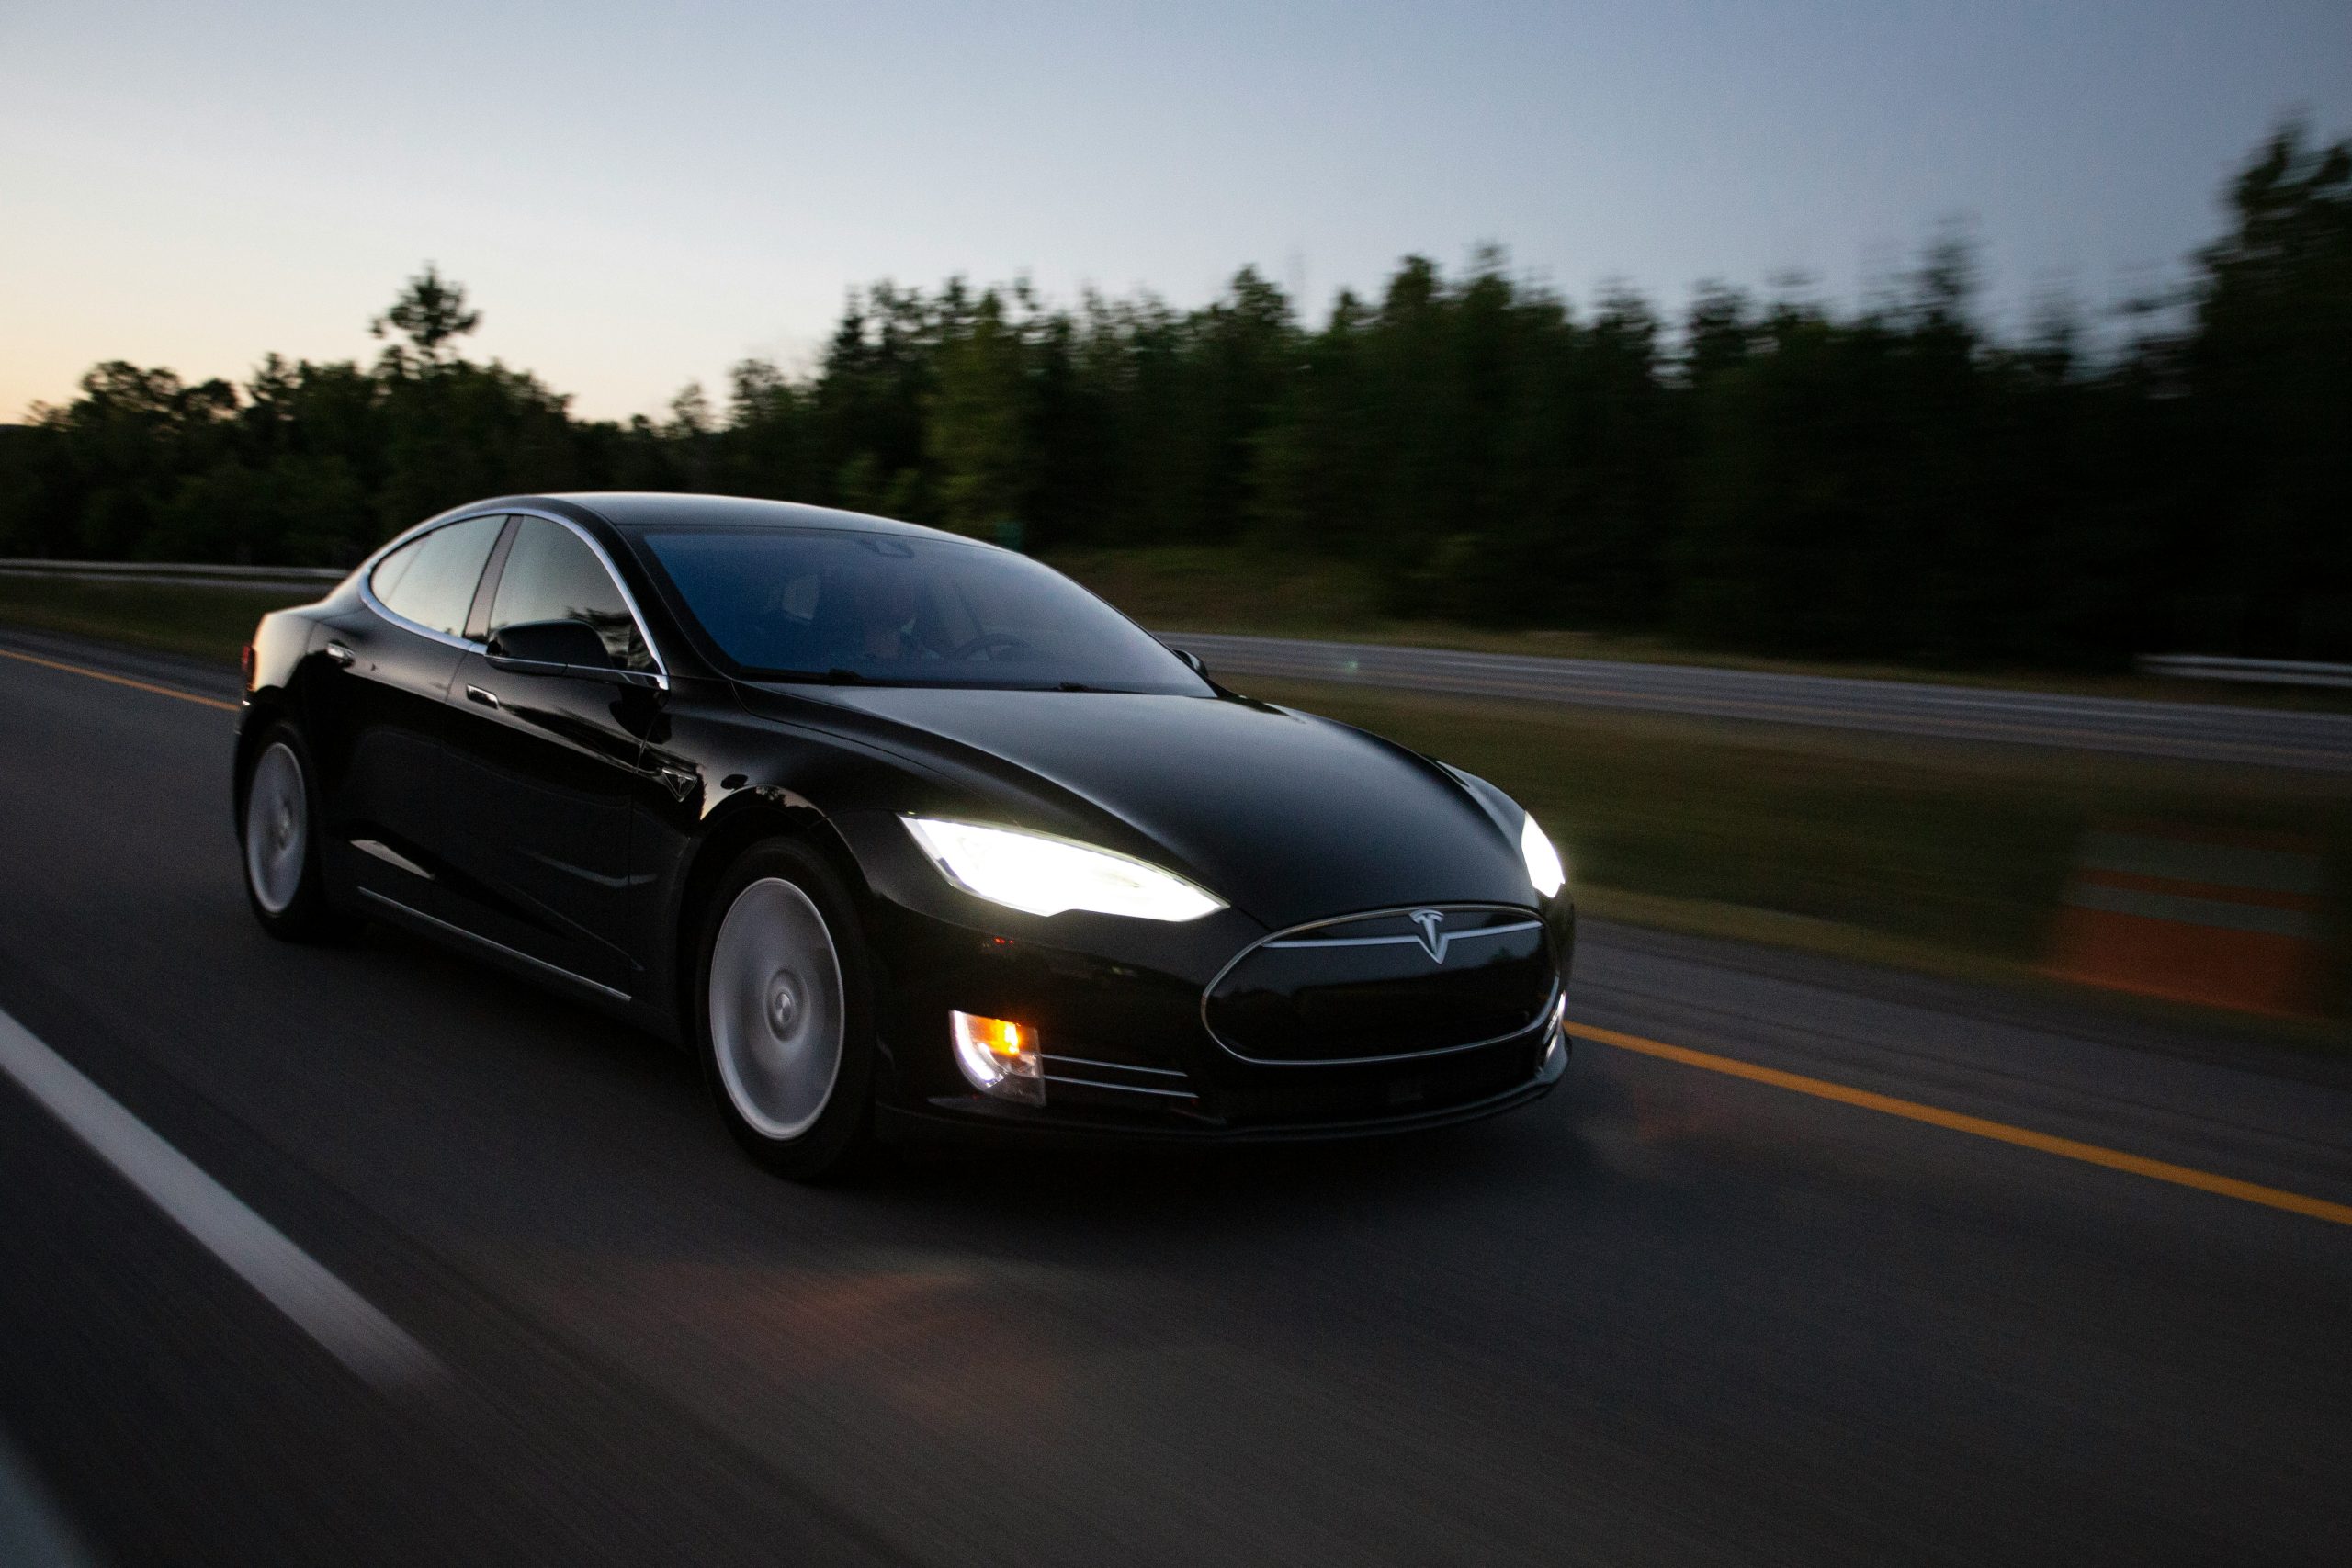 Tesla Model S Driving Down a Road at a Fast Speed